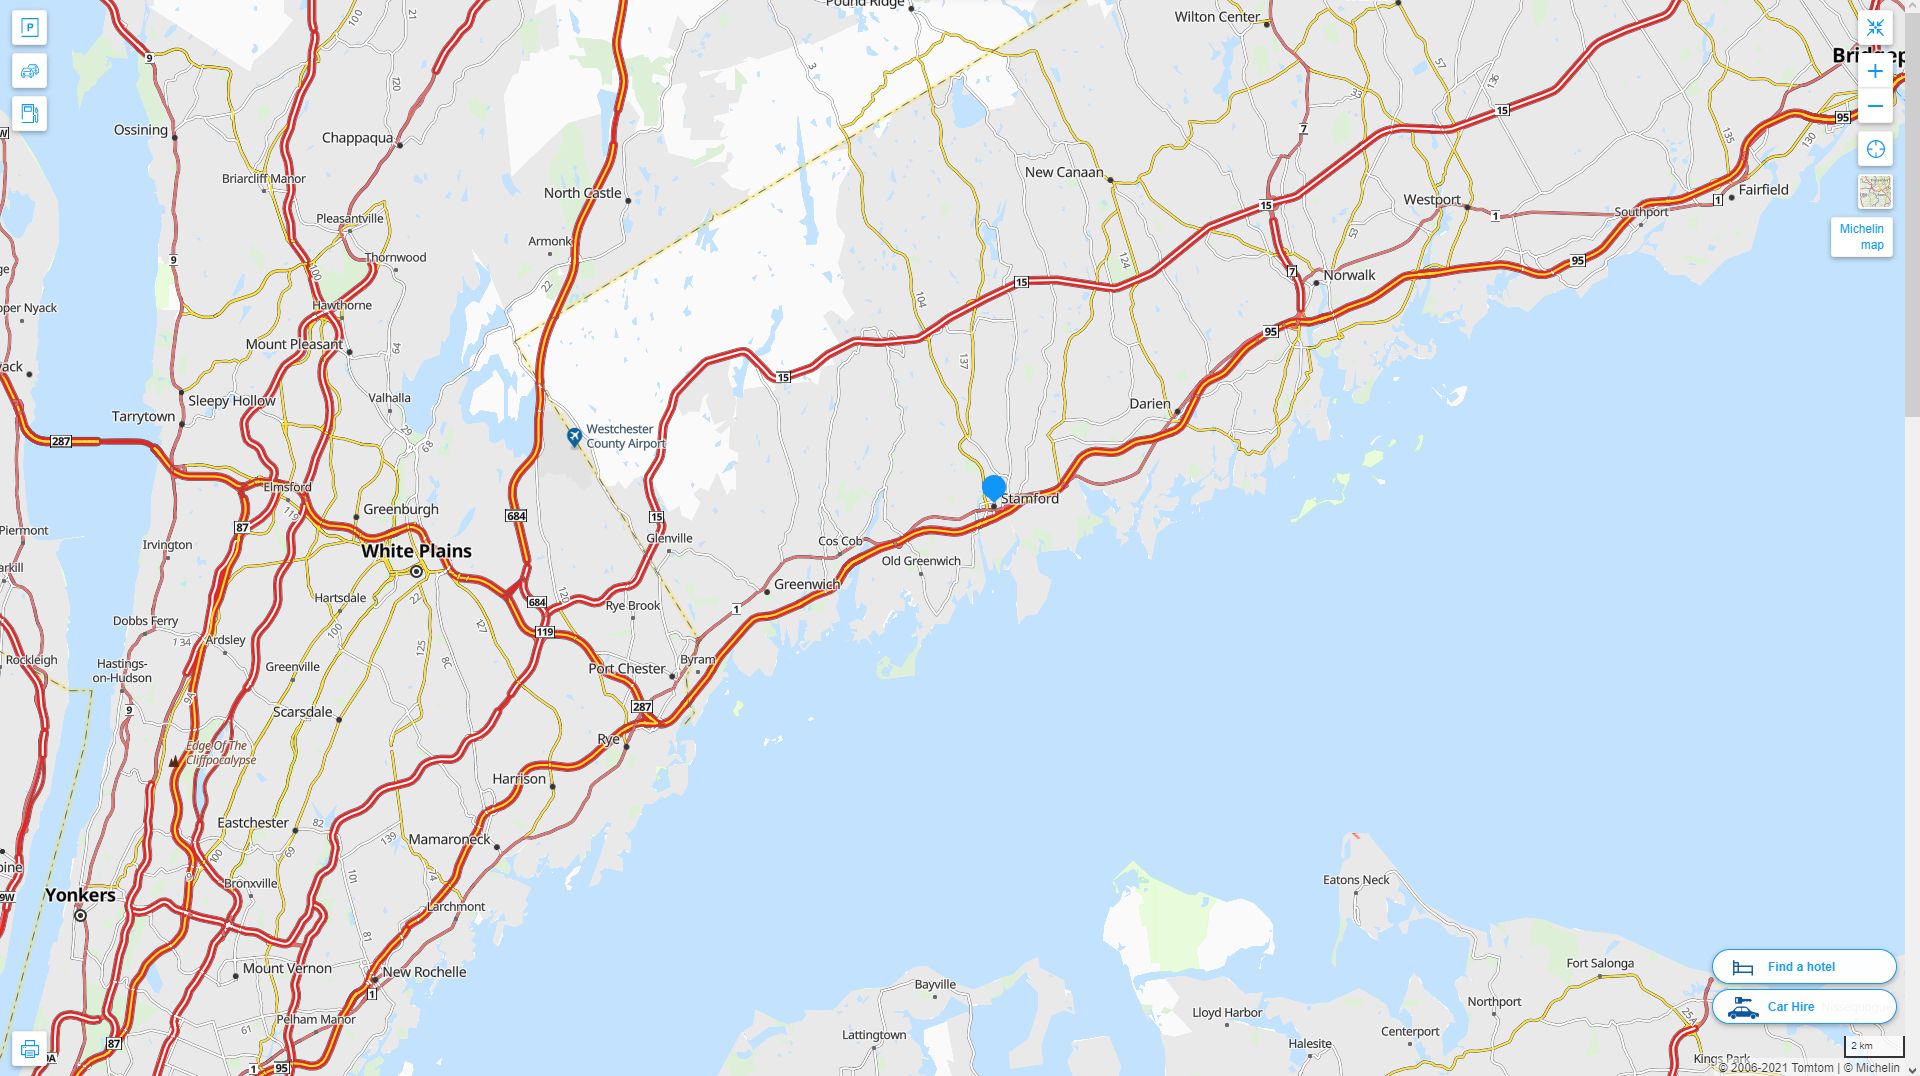 Stamford Connecticut Highway and Road Map